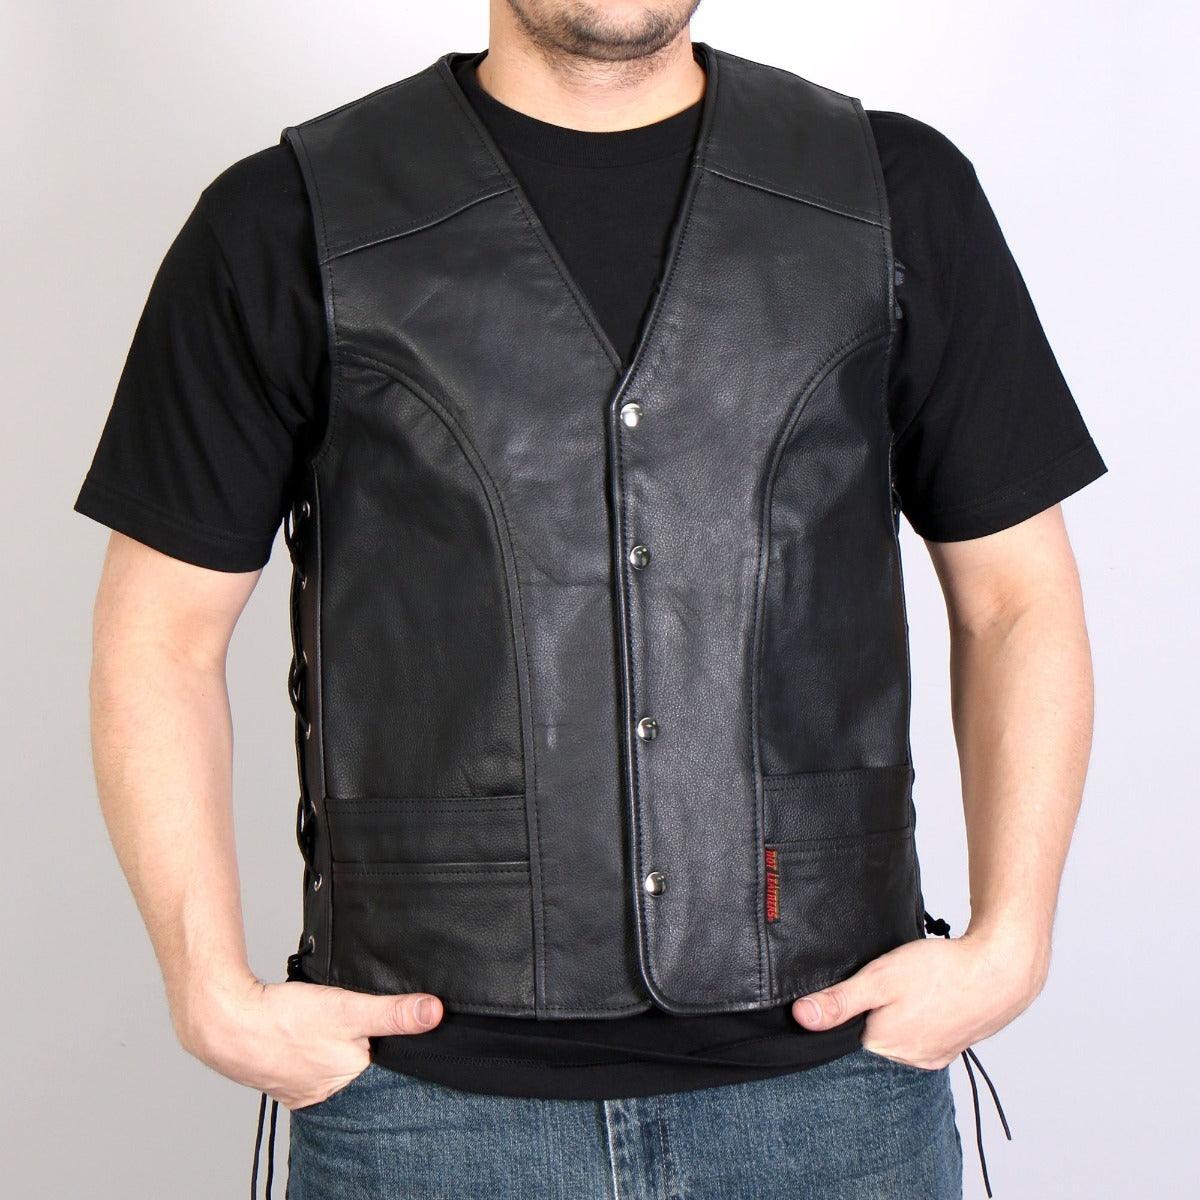 Hot Leathers Men's Leather Vest W/ Front Snaps And Side Lace - American Legend Rider